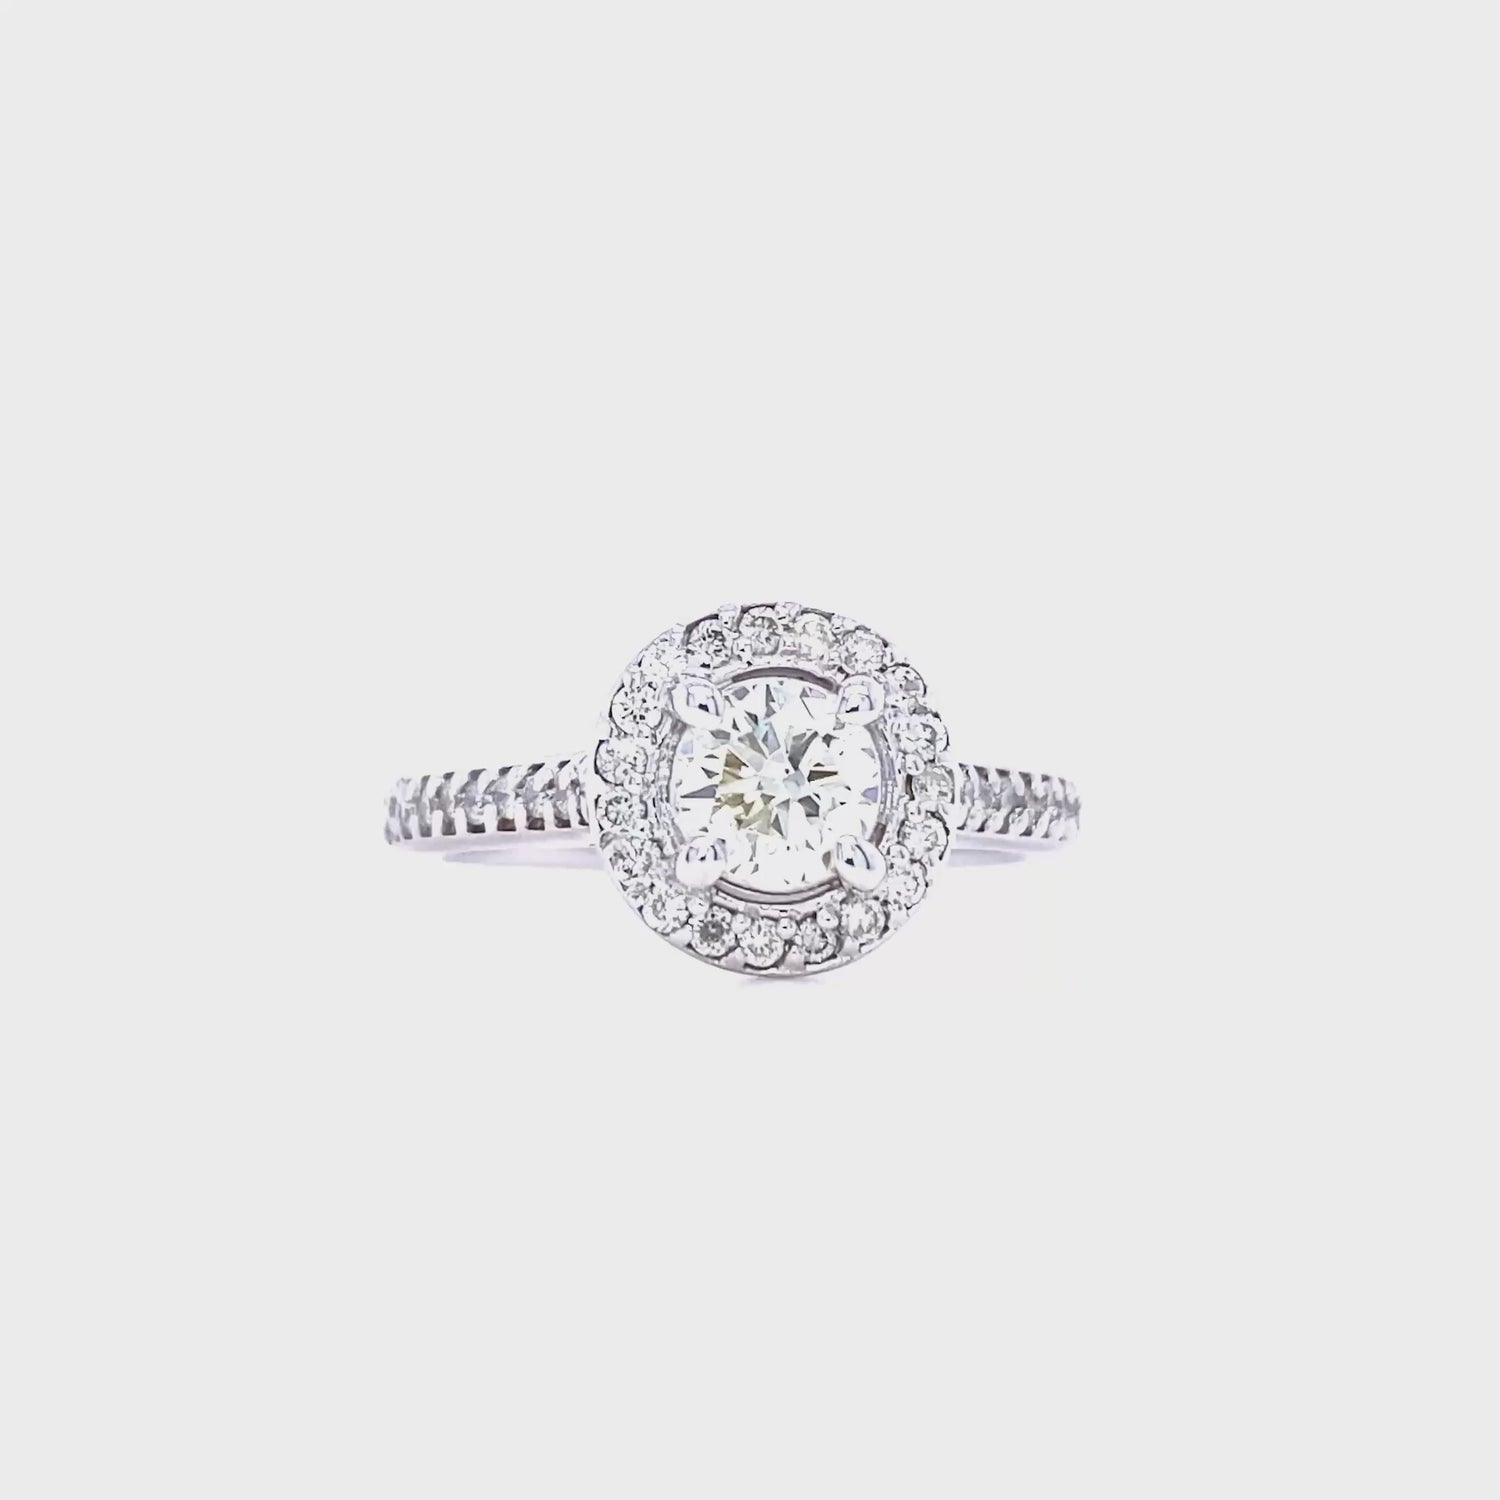 Low-Cost 0.90 CT Round Cut Diamond Engagement Ring in 14 KT White Gold